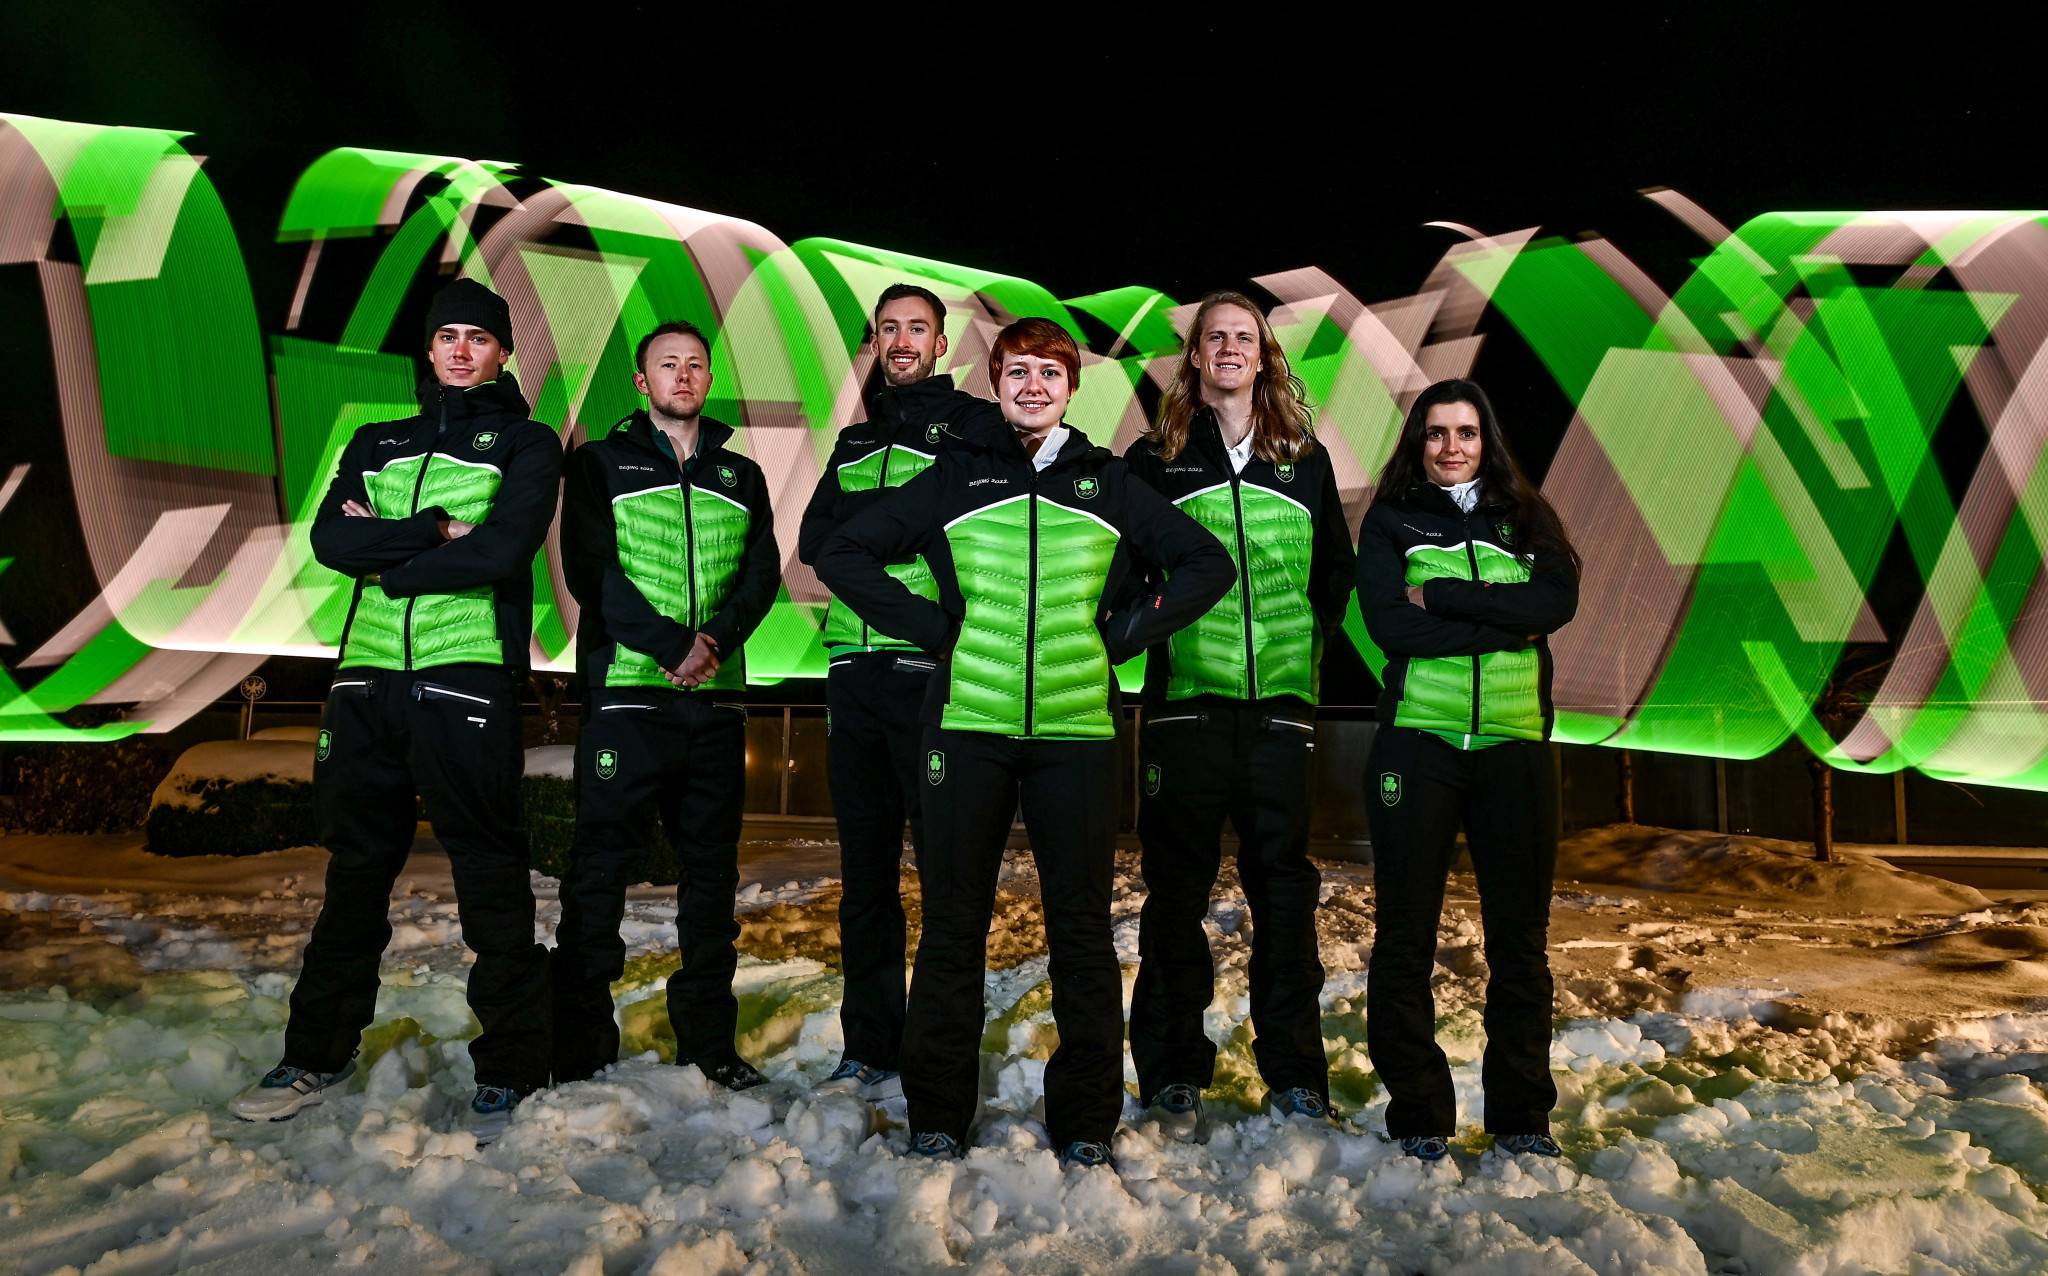 Ireland NOC announces VIST as winter kit supplier as team warms up for Beijing 2022